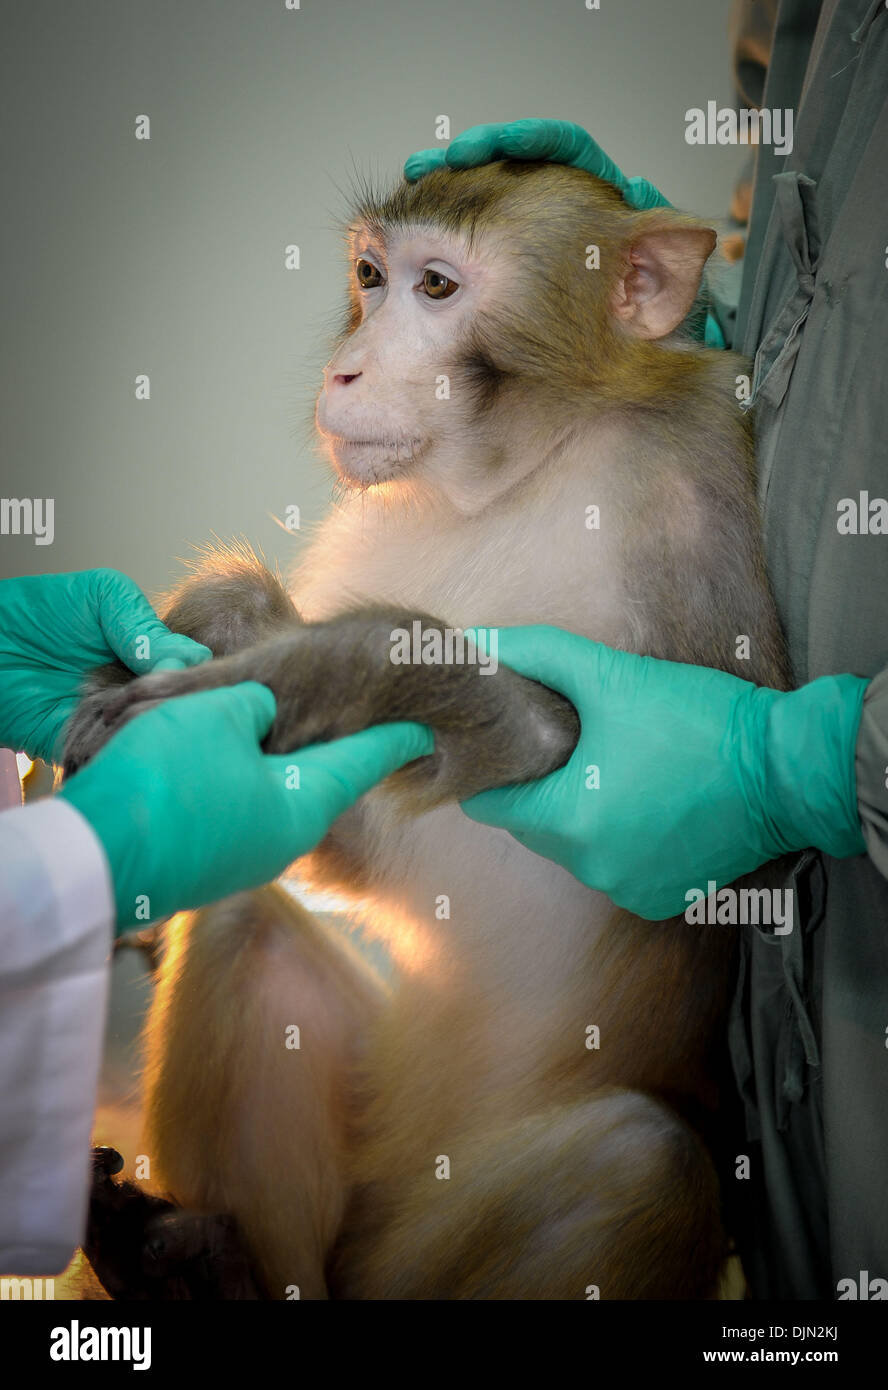 (131129) -- GUANGZHOU, Nov. 29, 2013 (Xinhua) -- Researchers examine the physiological index of experimental monkey No. 031137 at Guangzhou Institute of Biomedicine and Health of Chinese Academy of Sciences in Guangzhou, capital of south China's Guangdong Province, Nov. 13. 2013. A collaborative team co-led by the Comprehensive AIDS Research Center of Tsinghua University, the AIDS Institute of the University of Hong Kong Li Ka Shing Faculty of Medicine and the Guangzhou Institute of Biomedicine and Health of Chinese Academy of Sciences has conducted a five-year preclinical study of a novel AI Stock Photo